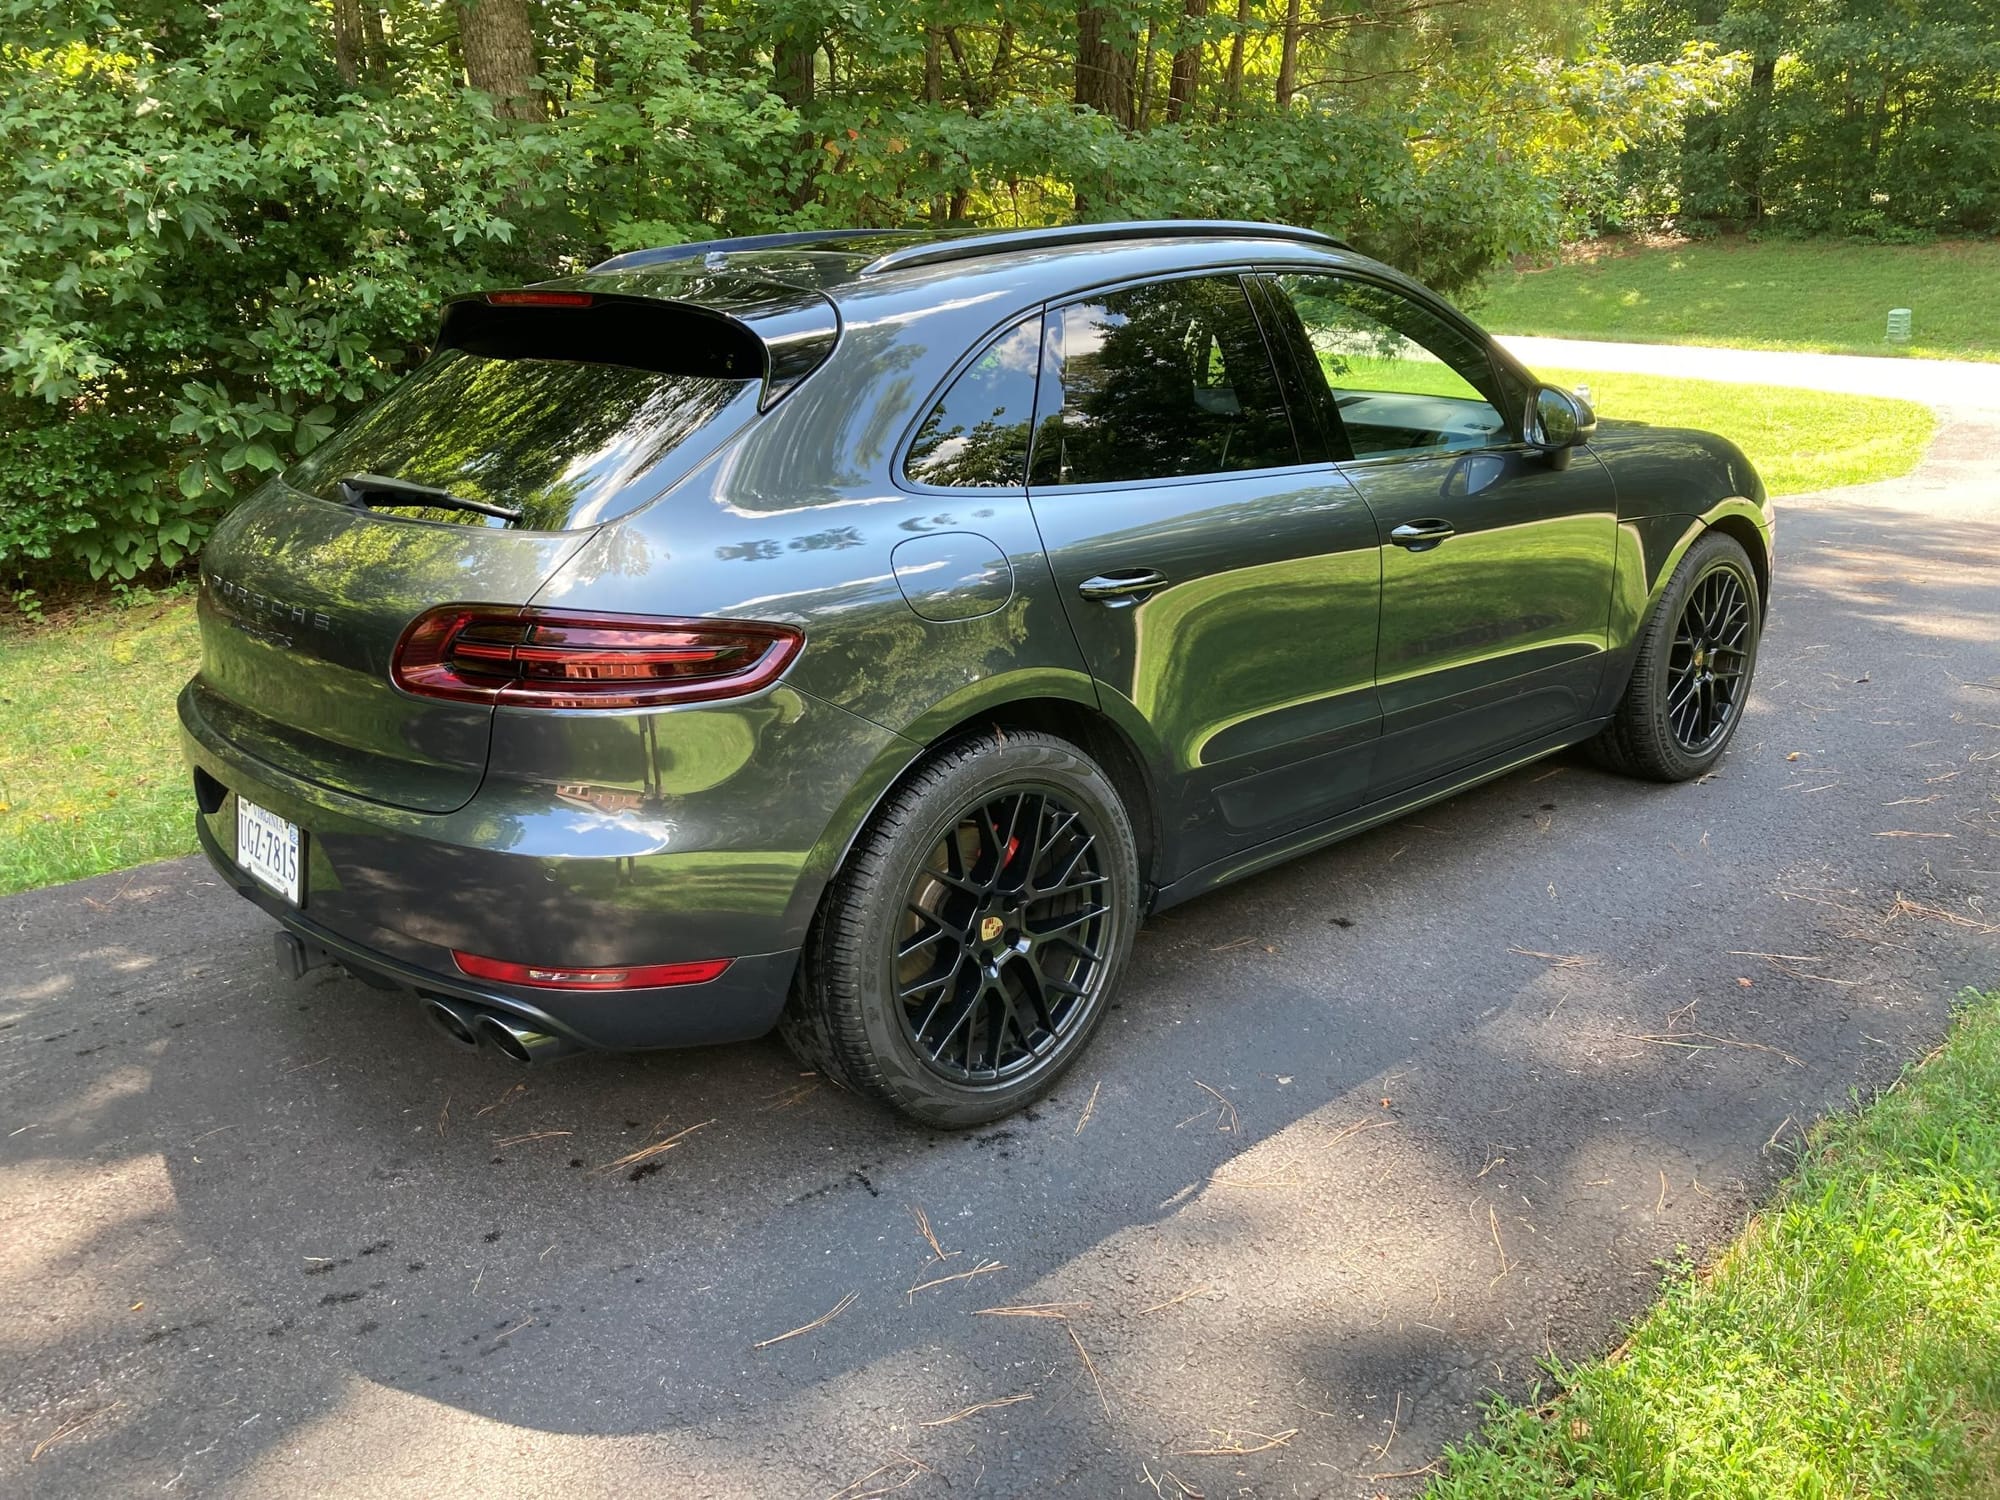 2017 Porsche Macan - FS 2017 Macan GTS CPO - Used - VIN WP1AG2A52HLB55924 - 48,500 Miles - 6 cyl - AWD - Automatic - SUV - Gray - Chesterfield, VA 23838, United States